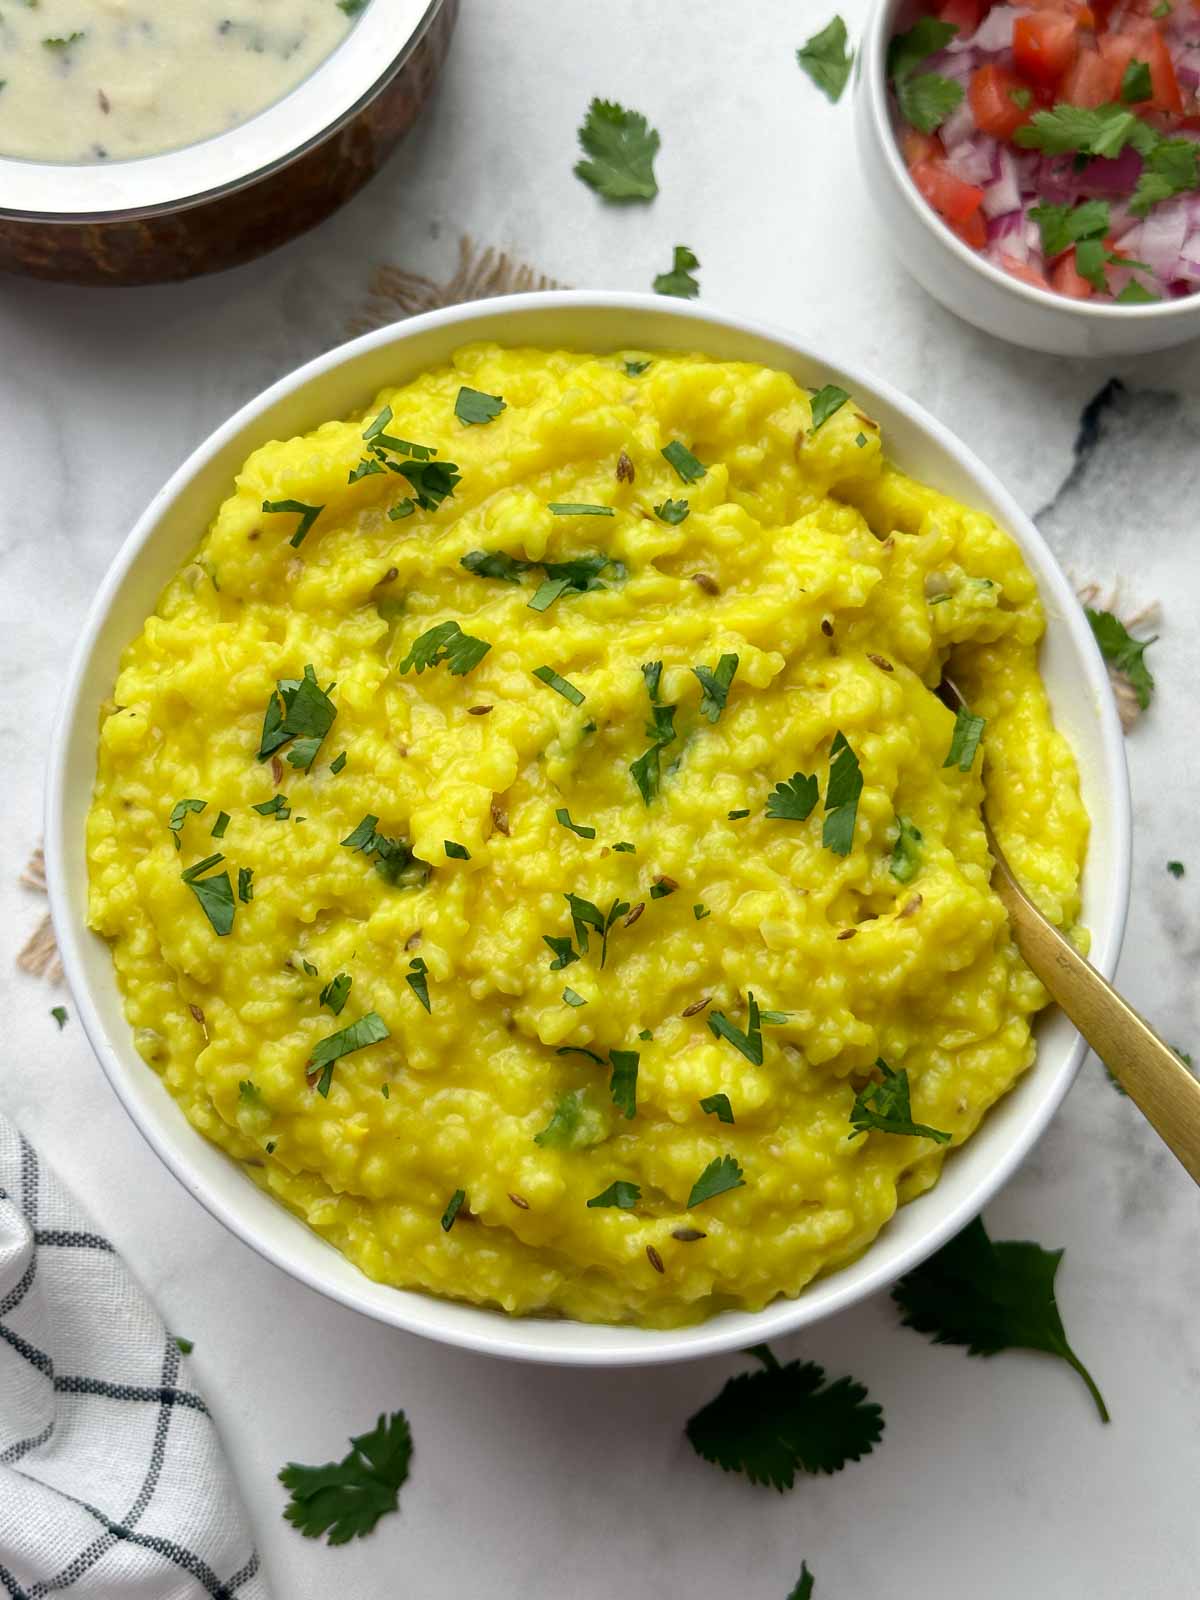 moong dal khichdi served in a bowl with a spoon and kadhi and salad on the side